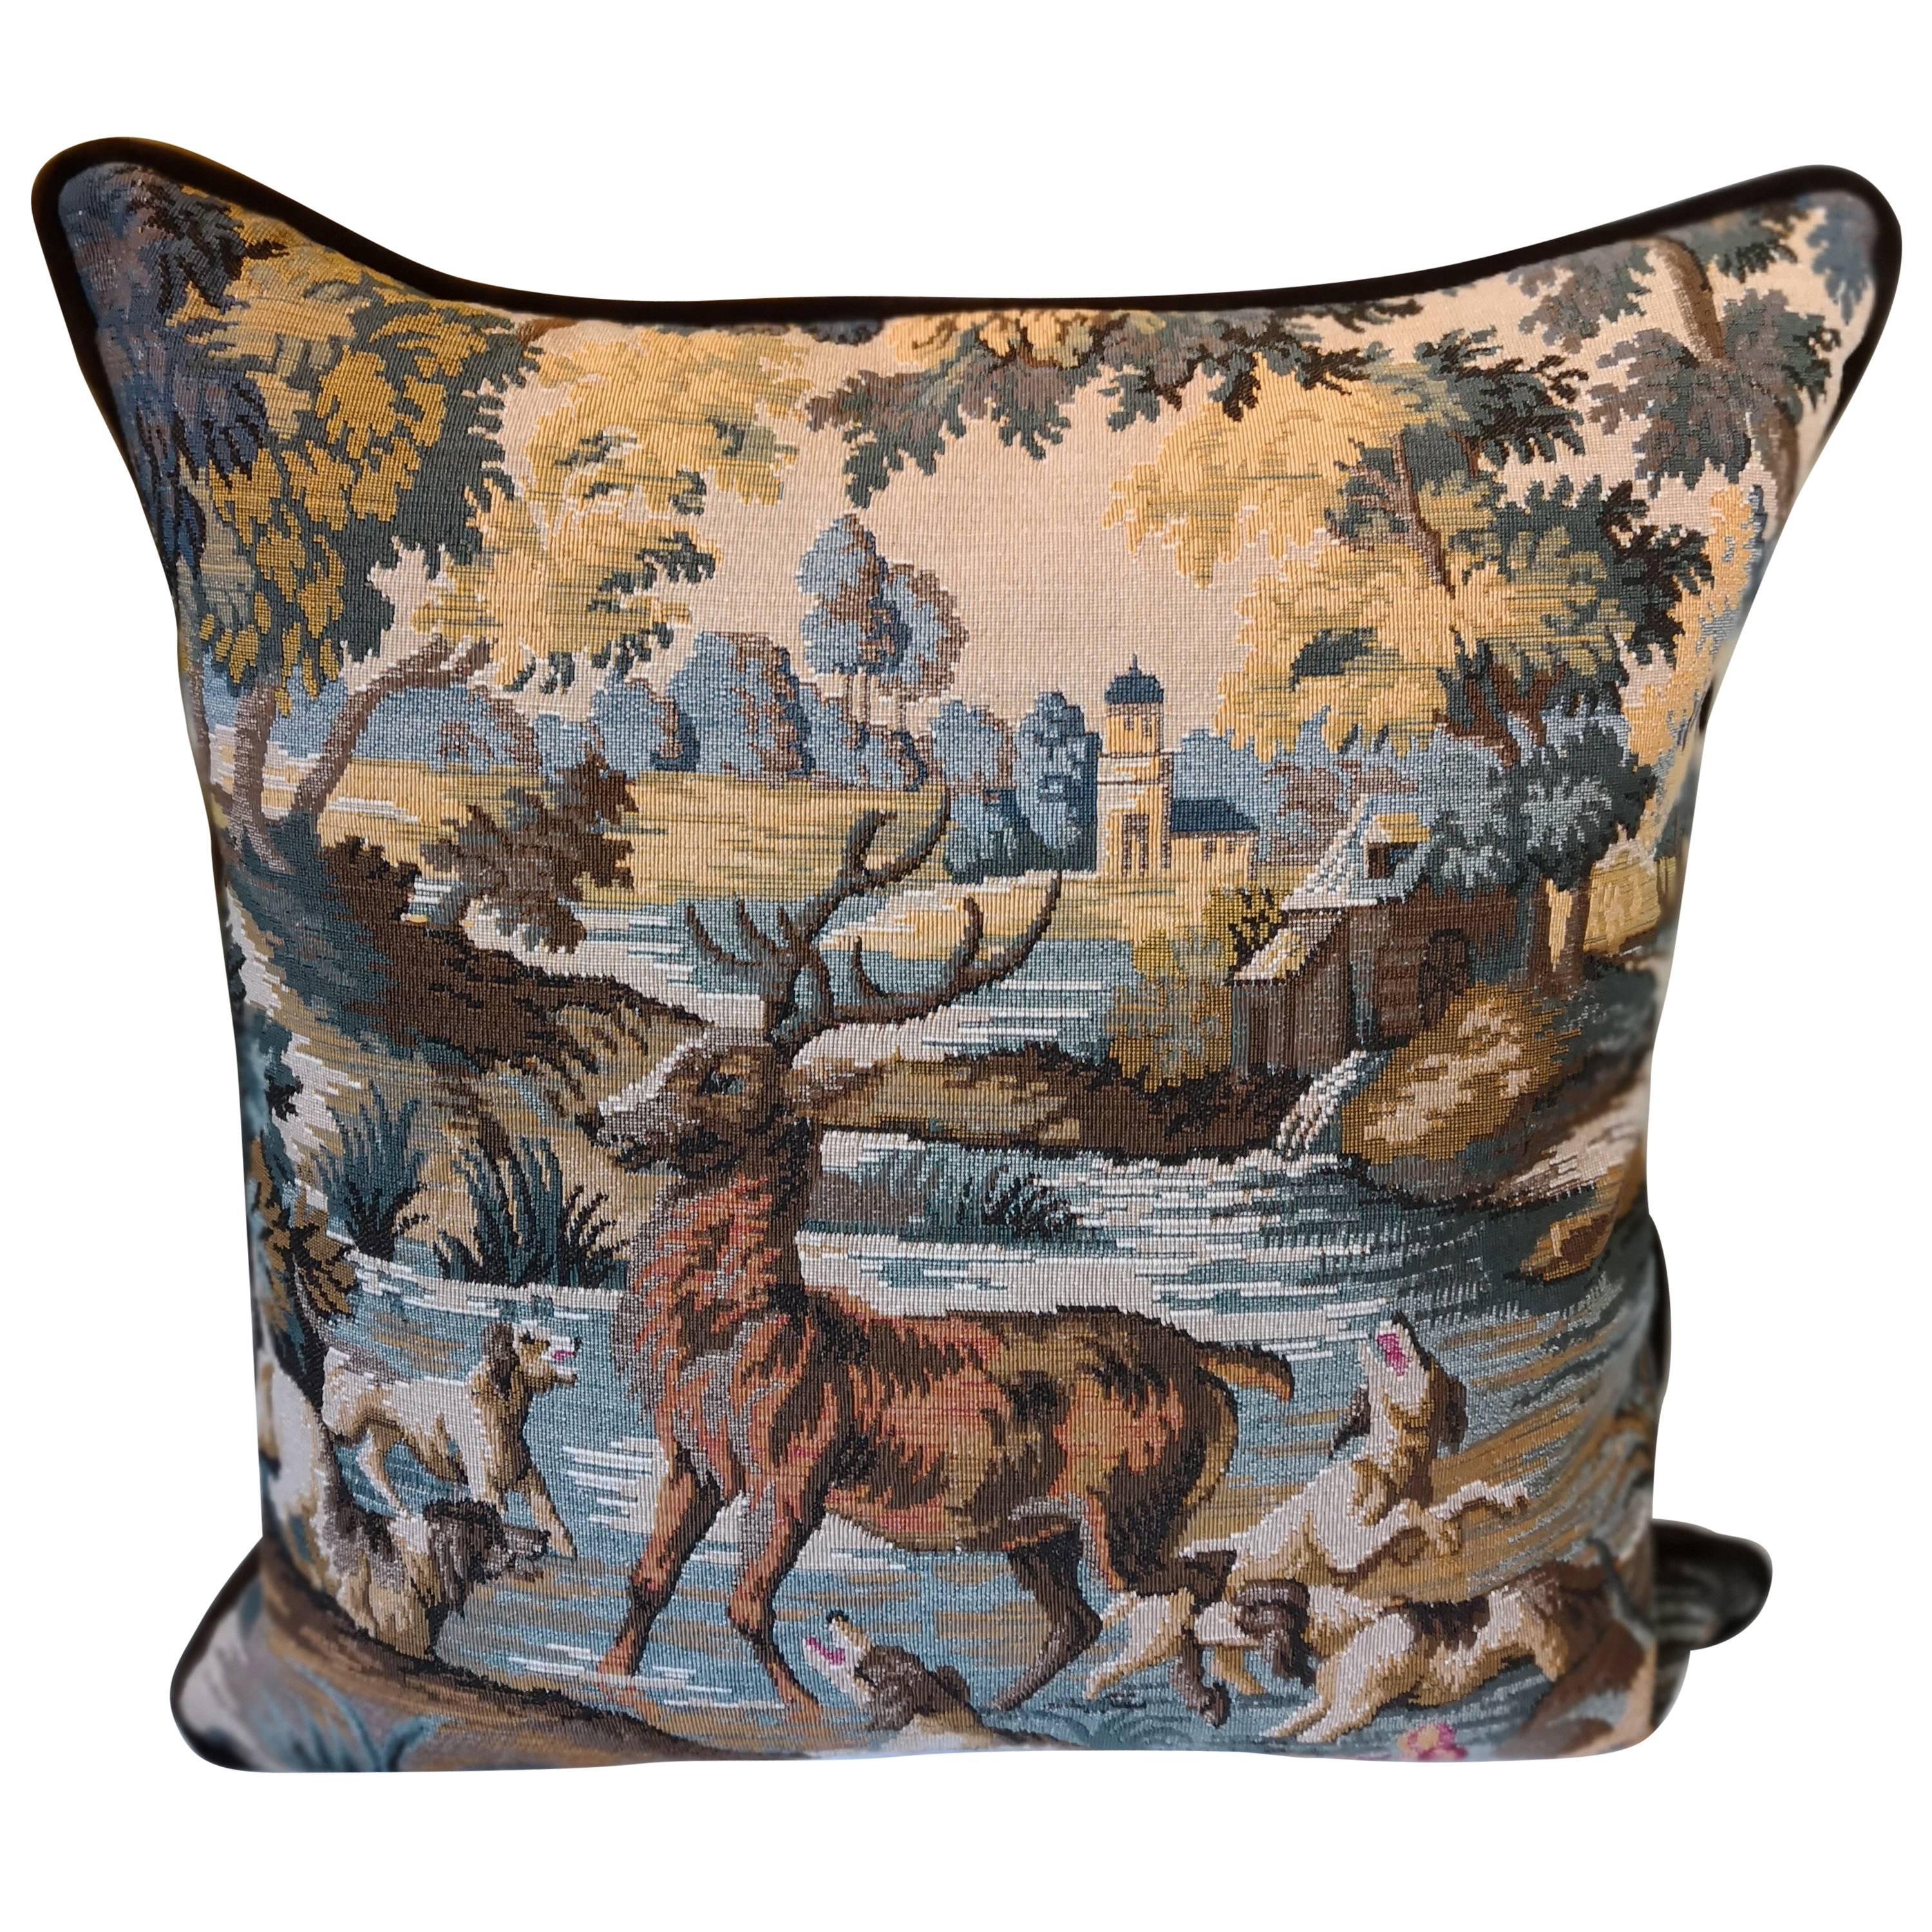 19th Century German Tapestry Fragment with Hunting Scene